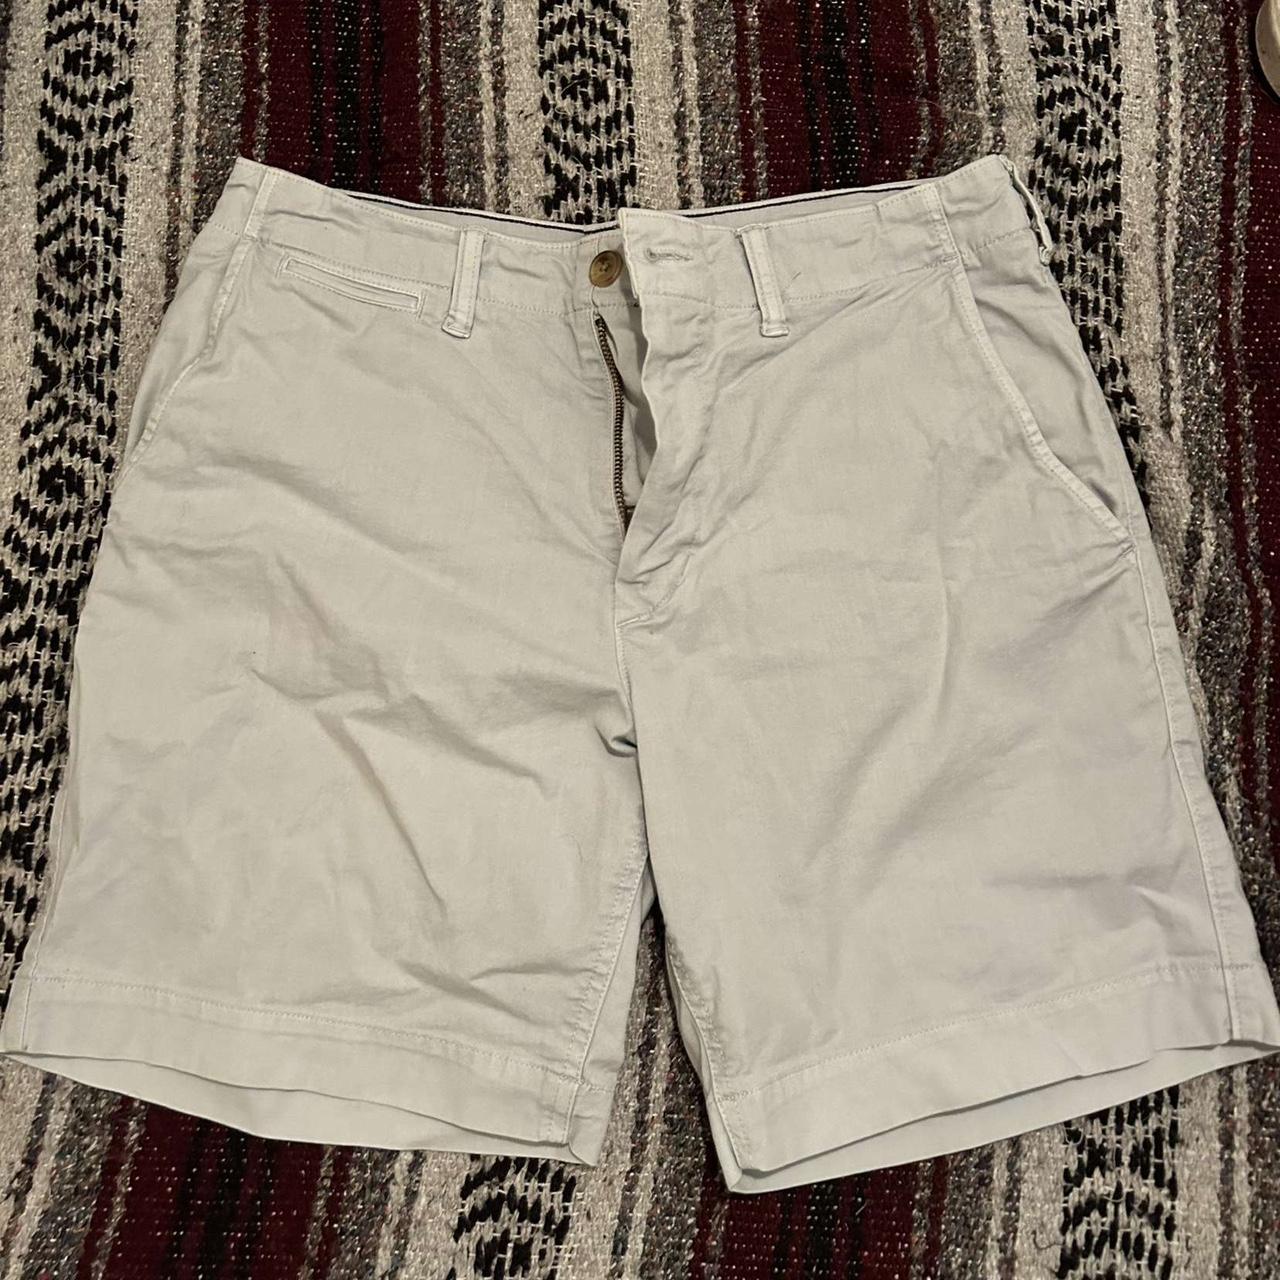 American Eagle Outfitters Men's Blue and White Shorts | Depop